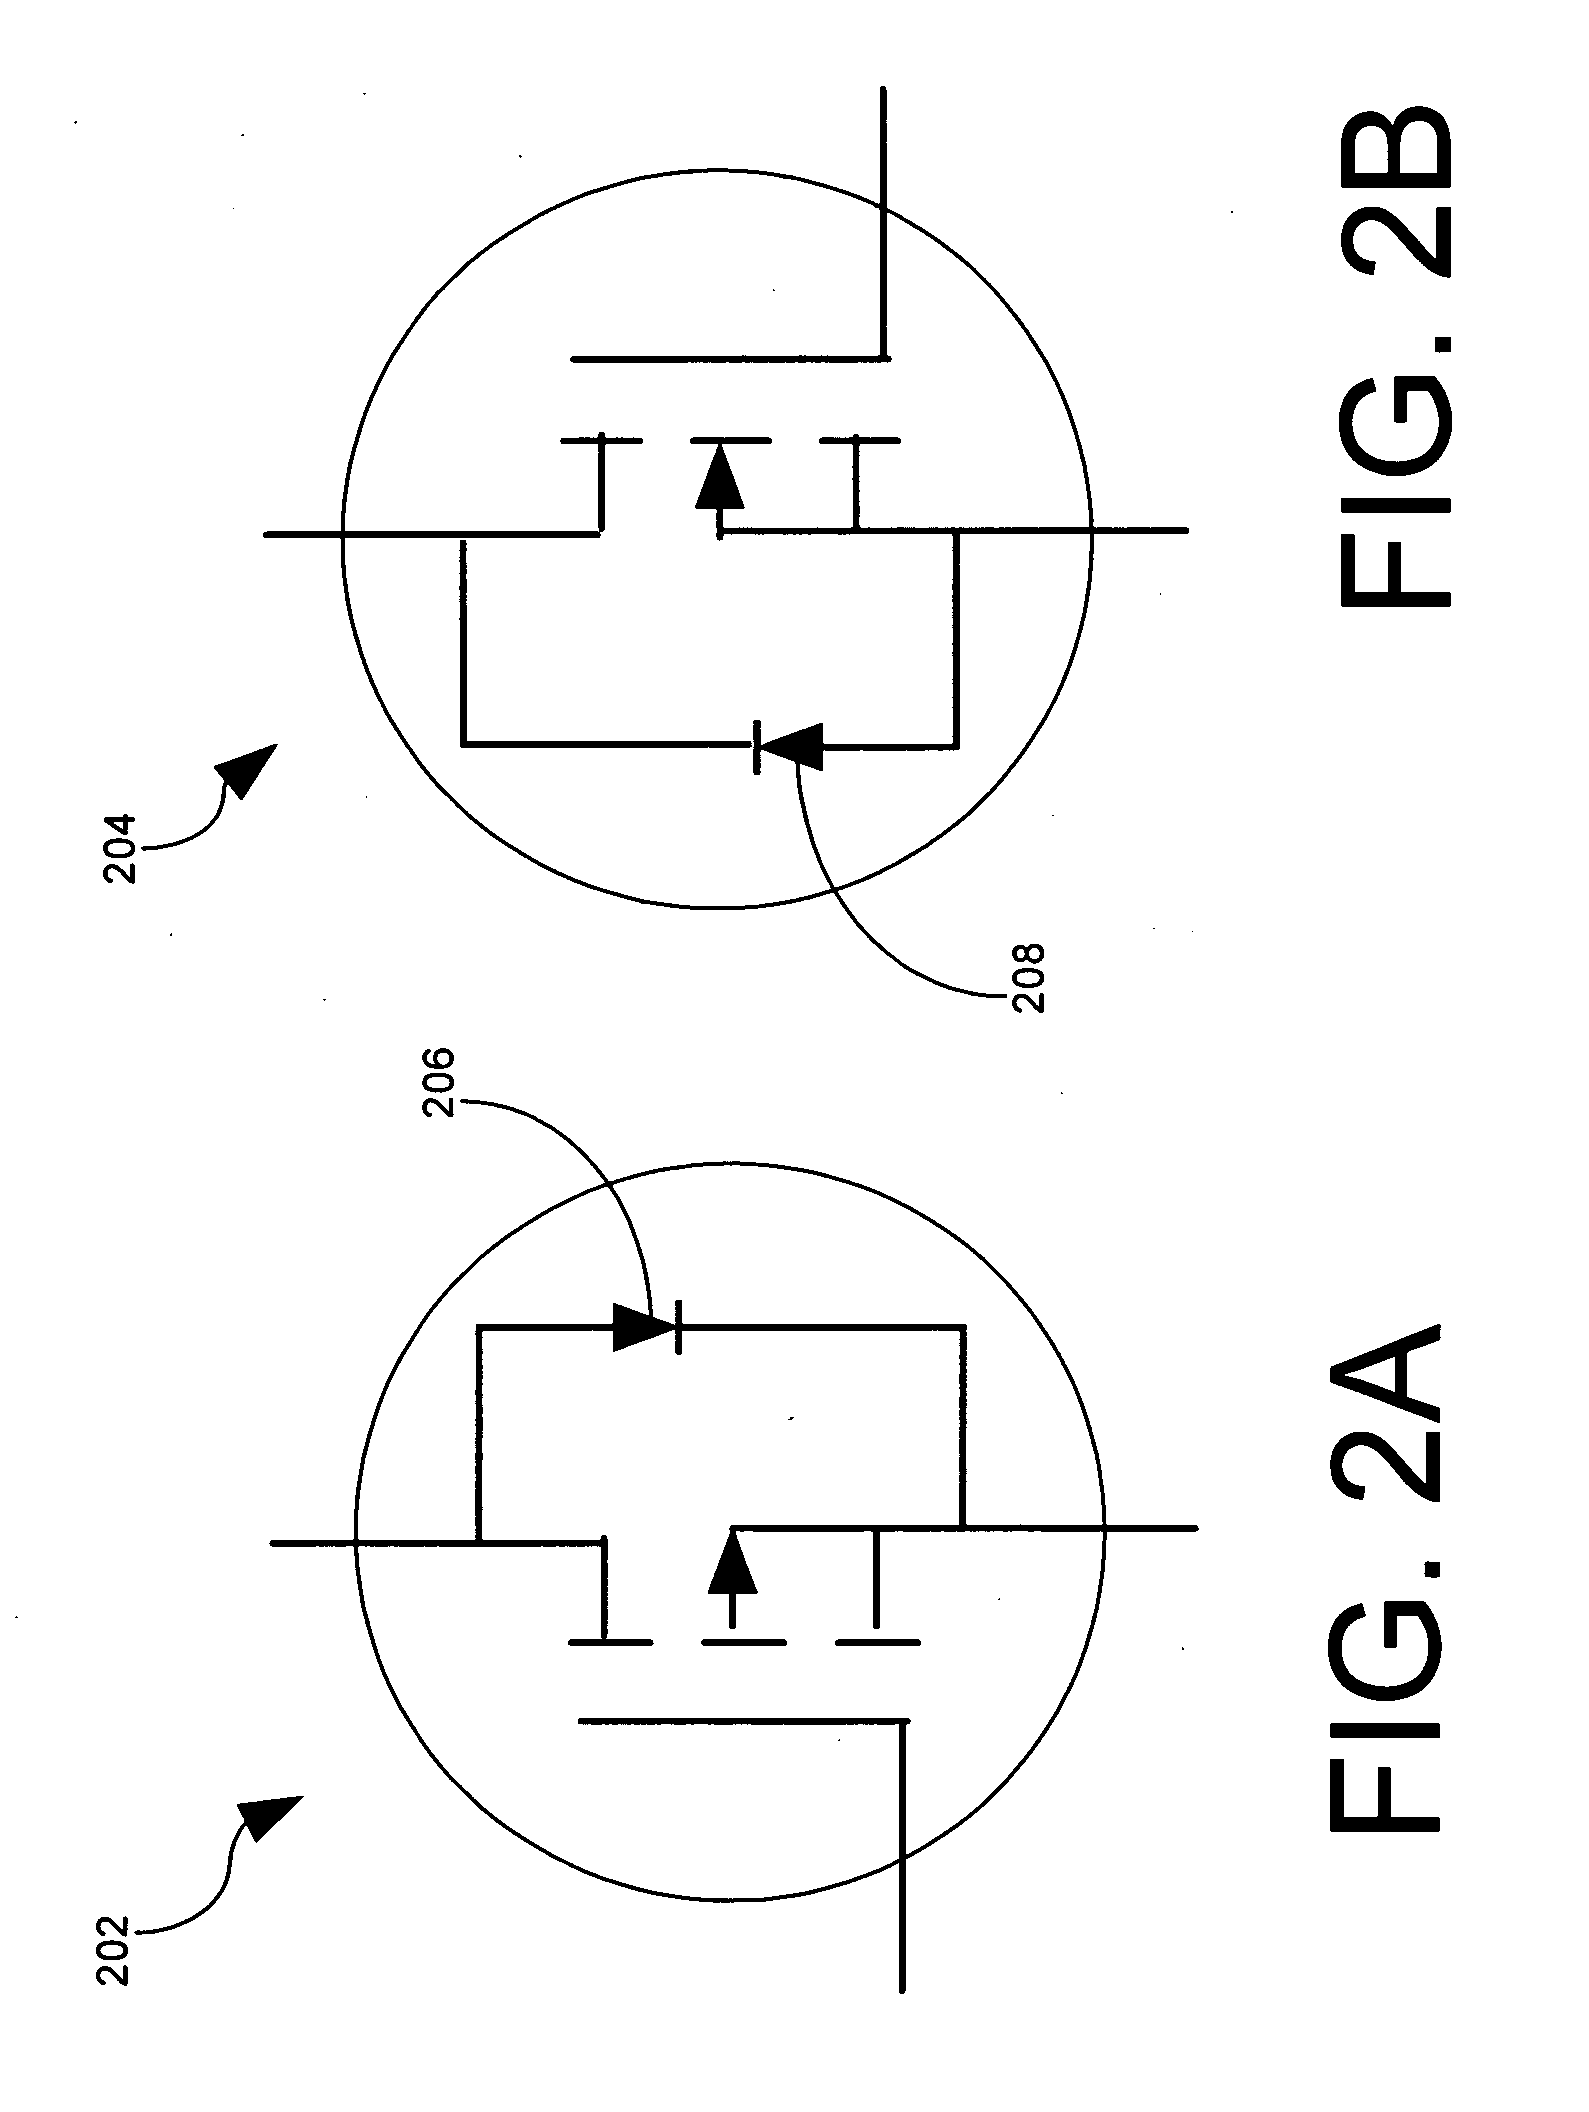 Low-loss rectifier with shoot-through current protection